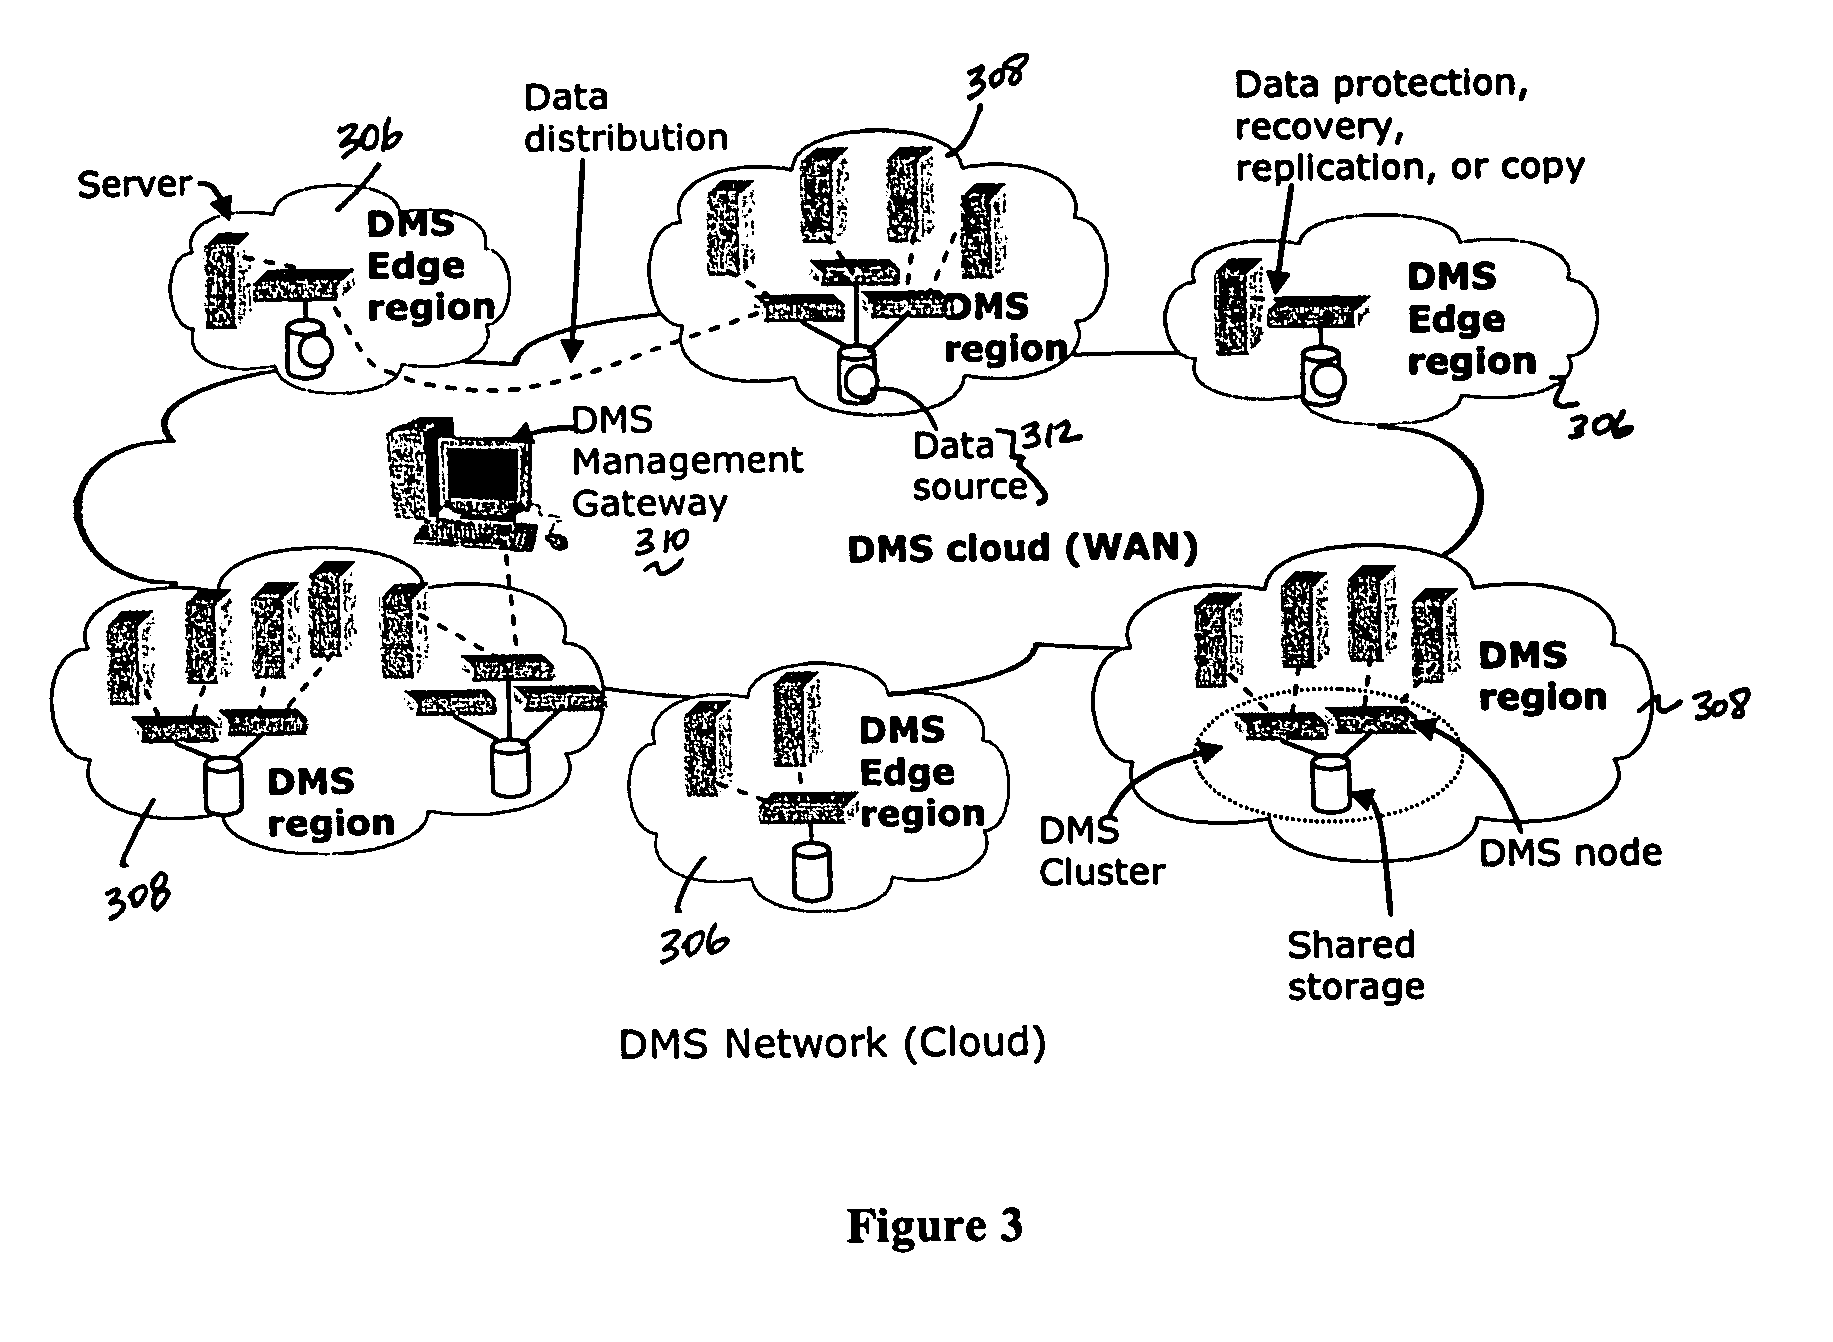 Method and system for data reduction